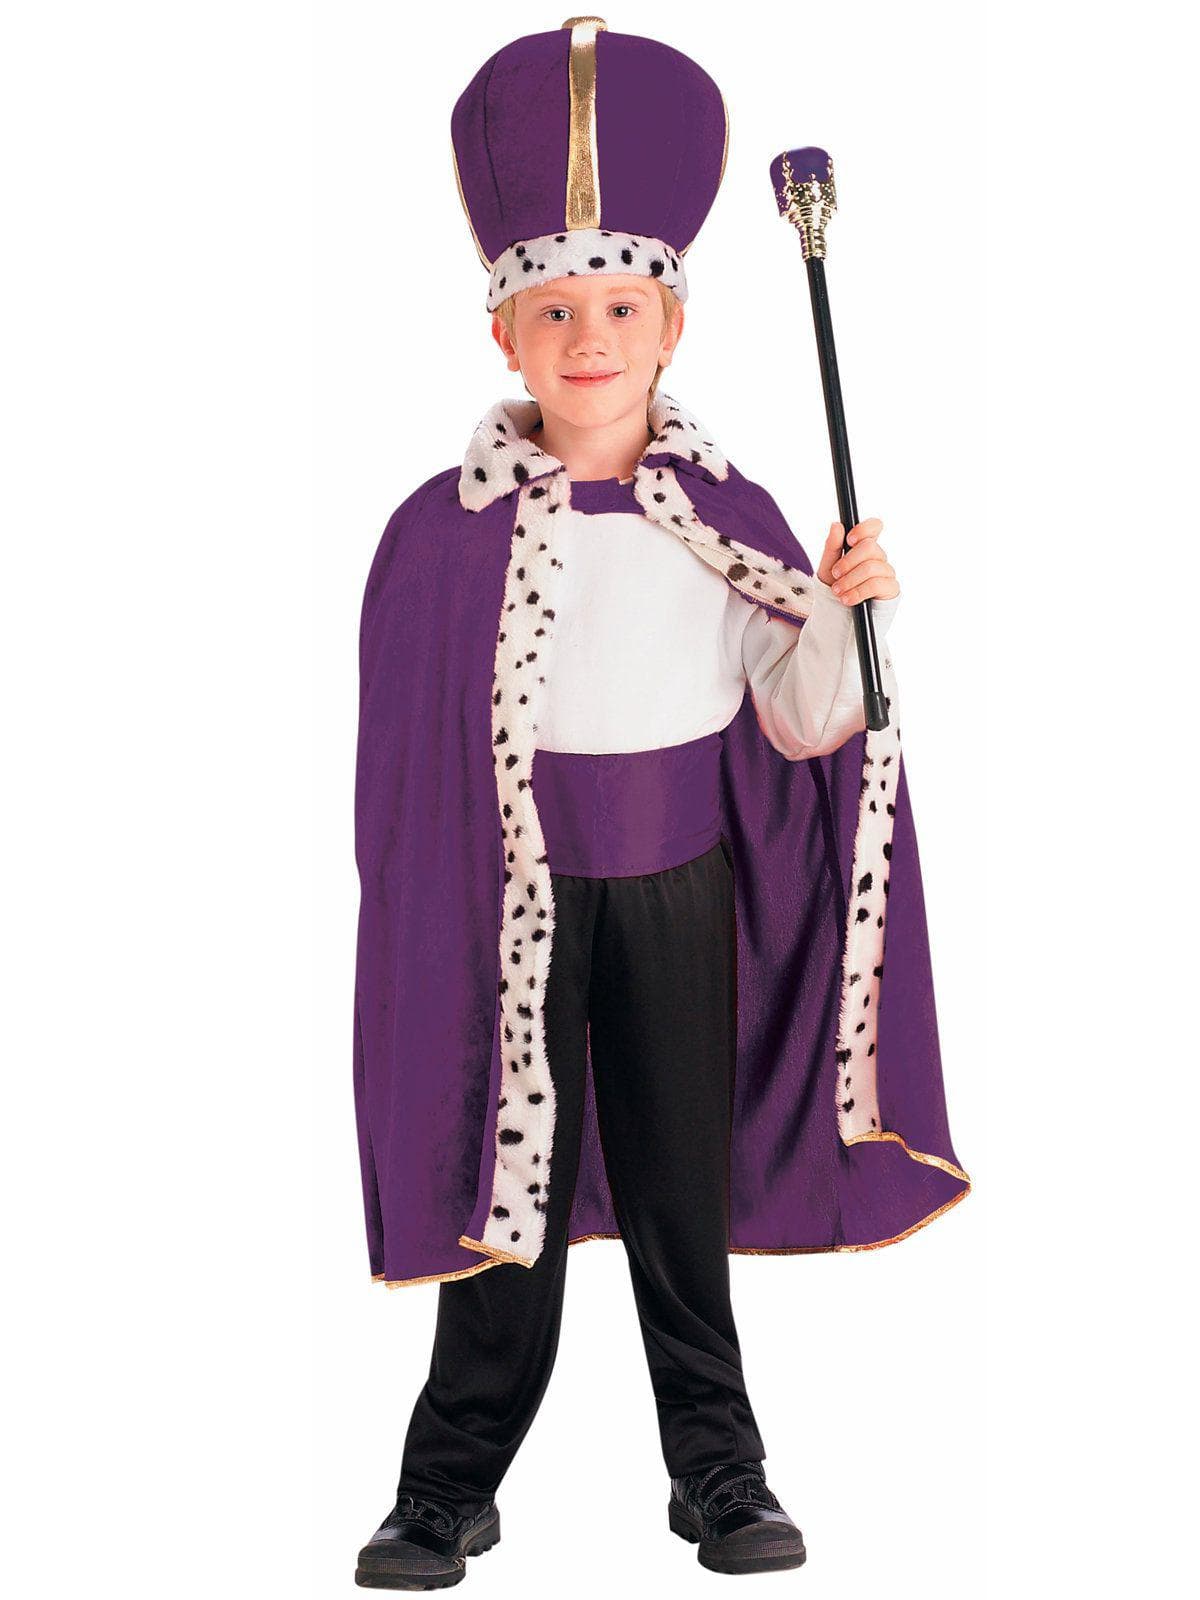 Kids' Royal Purple King Cape and Crown - costumes.com